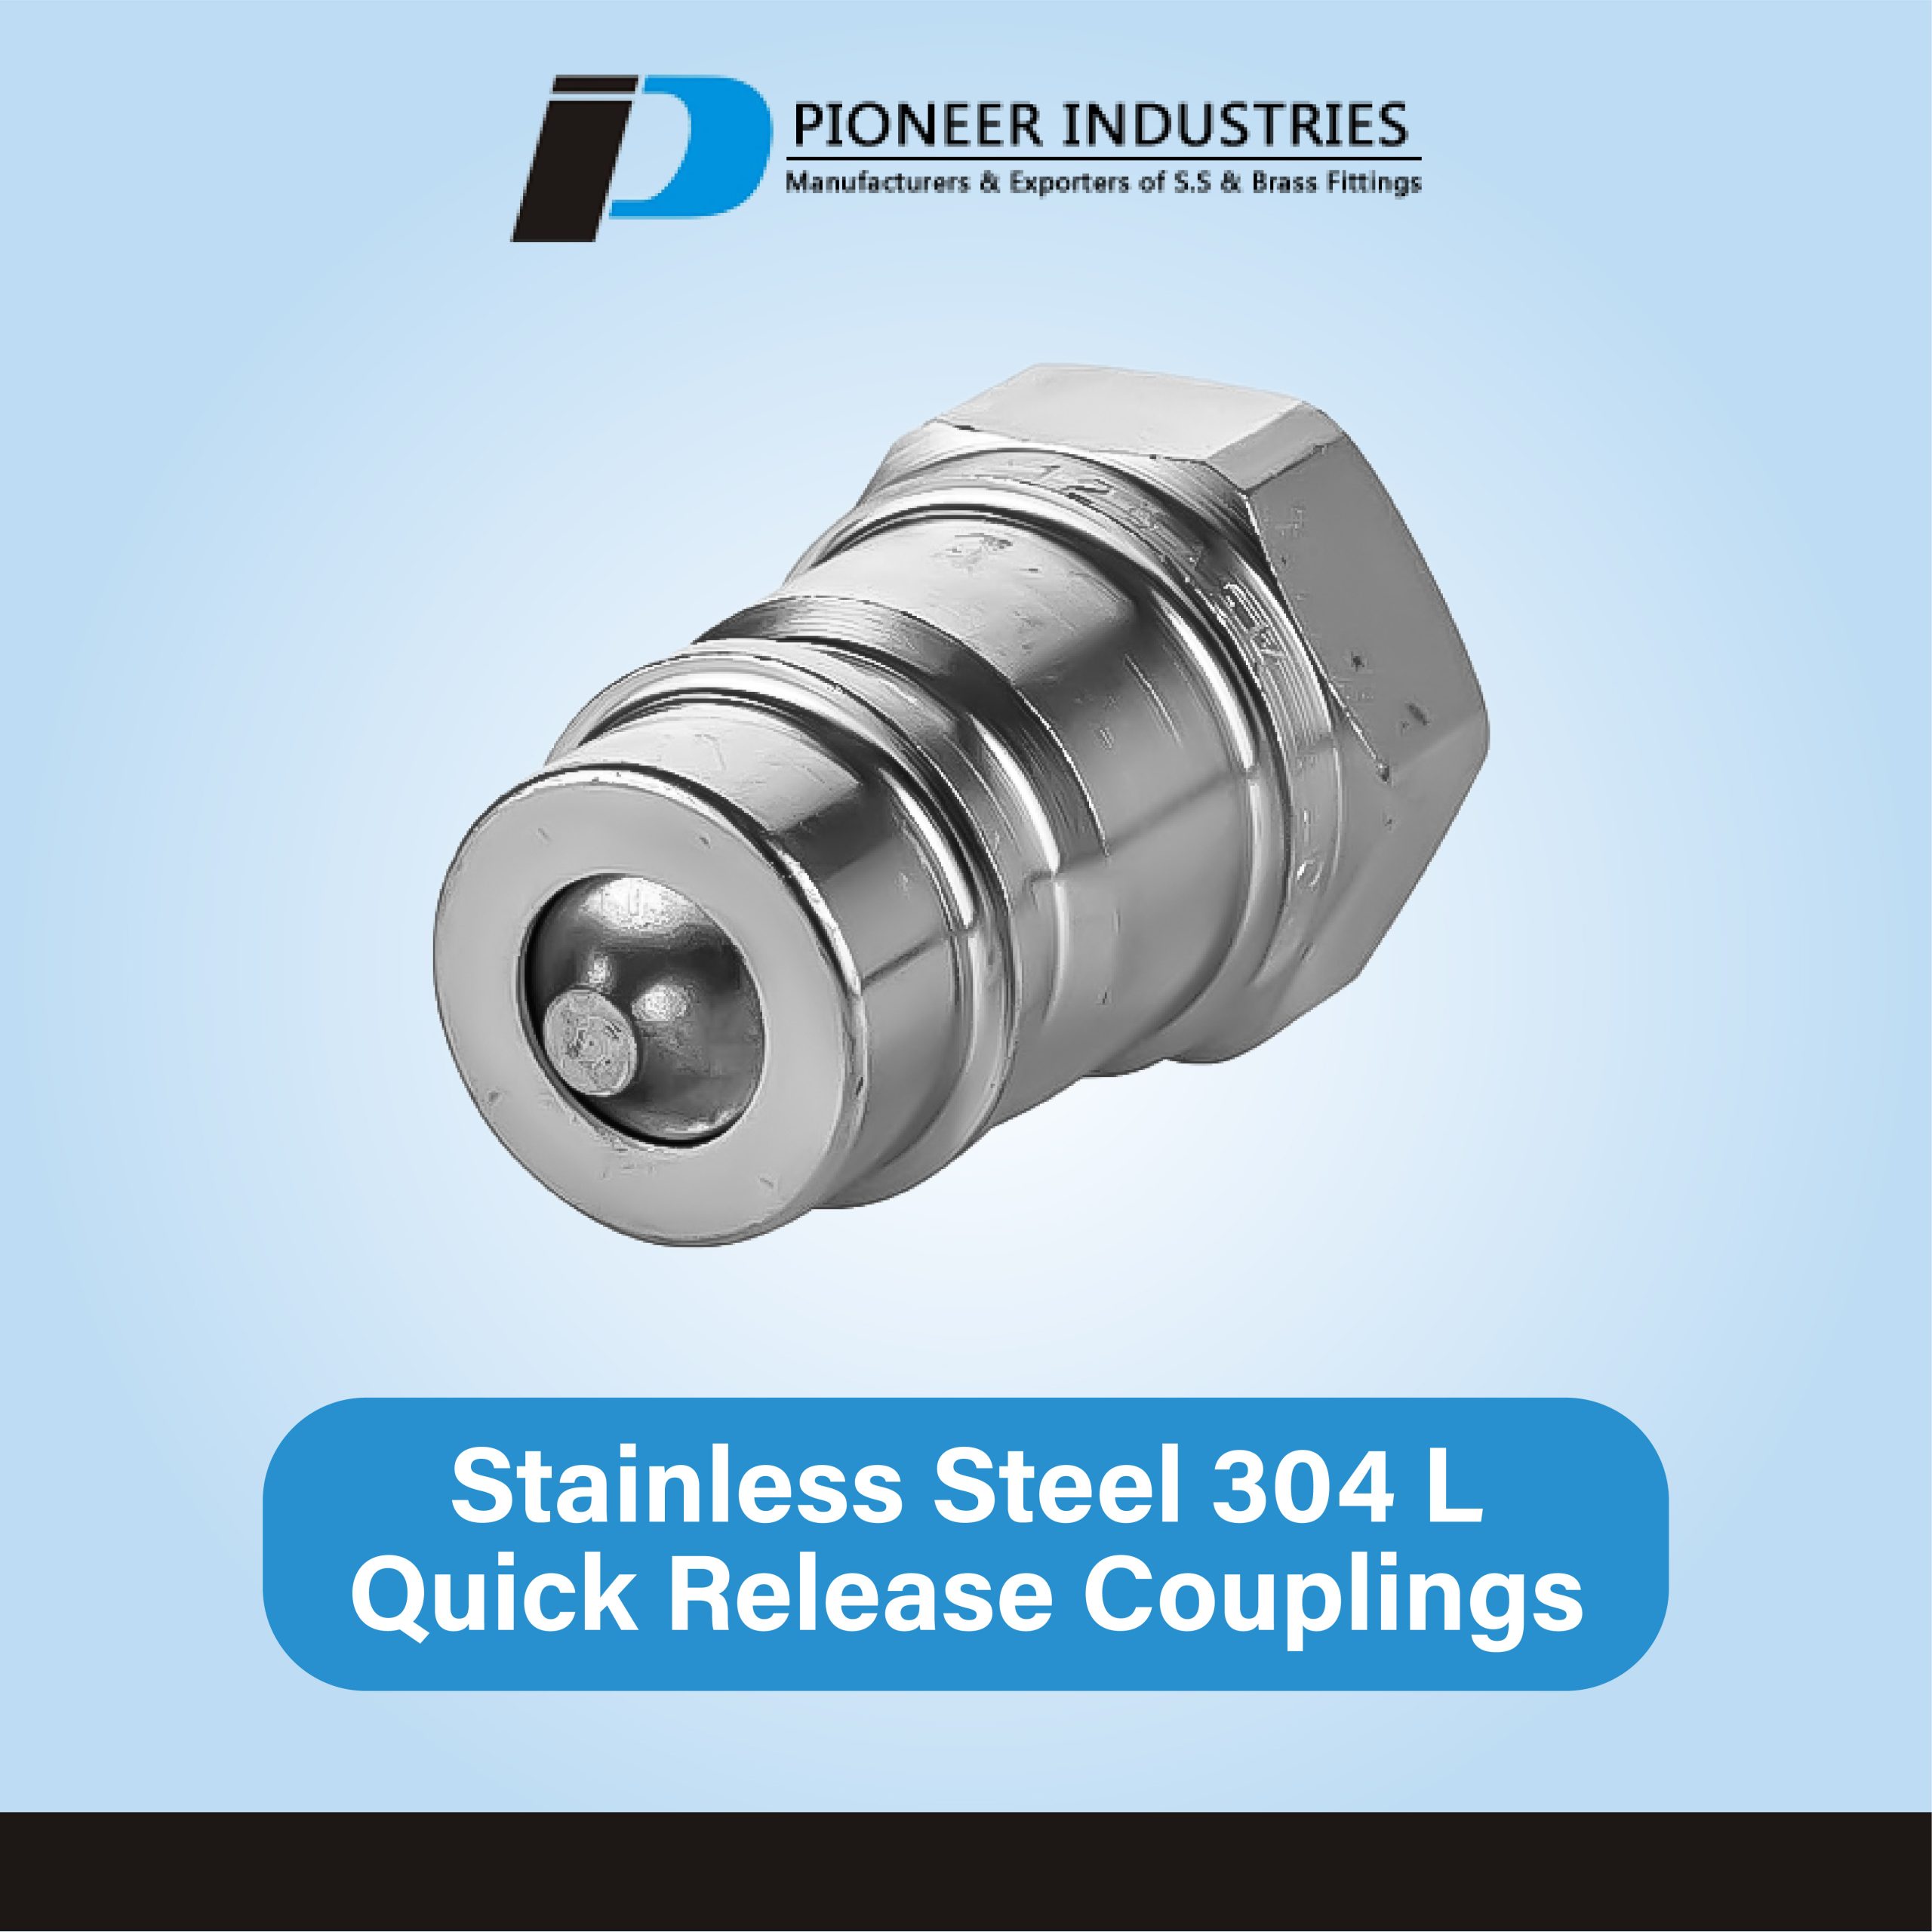 Stainless Steel 304 L Quick Release Couplings